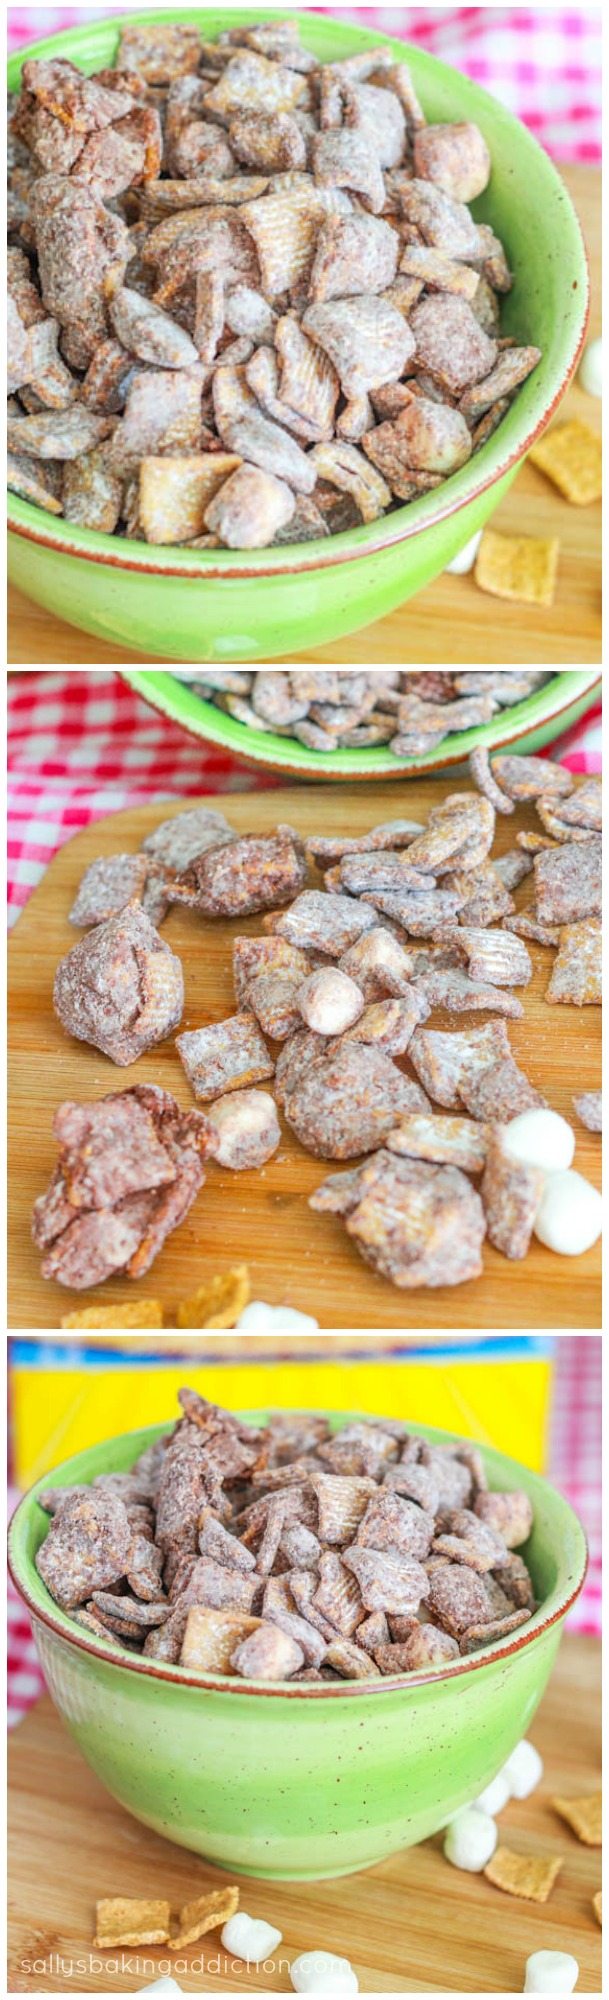 3 images of s'mores puppy chow